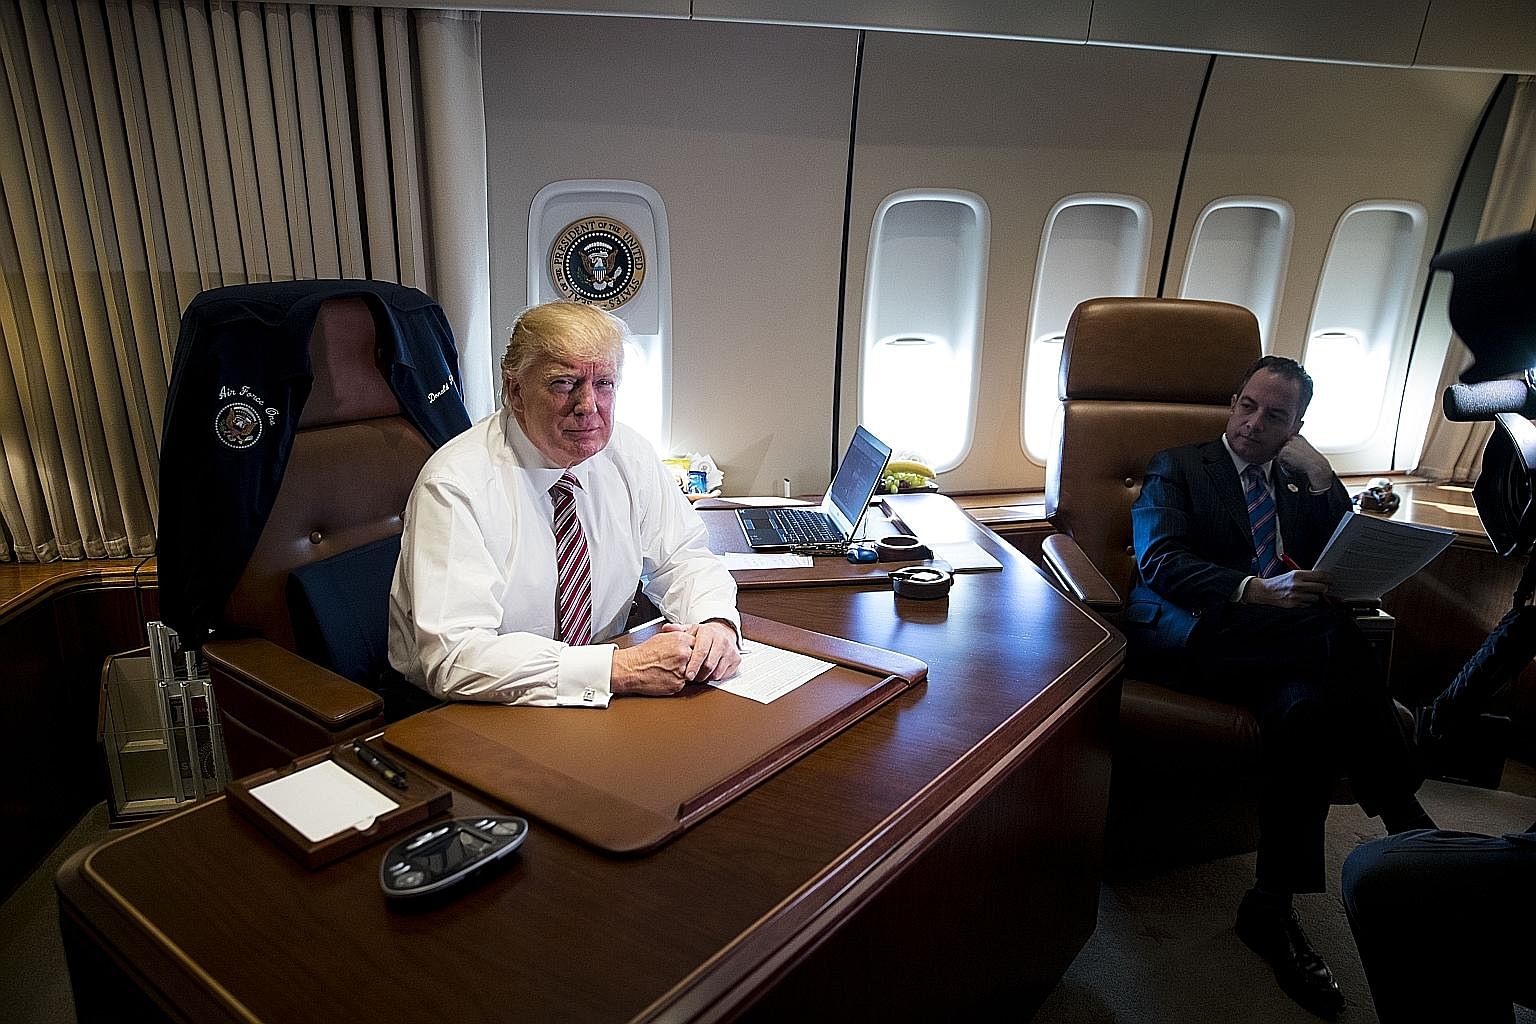 Mr Trump on board Air Force One with chief of staff Reince Priebus during a trip to Philadelphia on Sunday. The many executive orders he has issued in his first week as President include pulling out of the Trans-Pacific Partnership trade deal, and gr